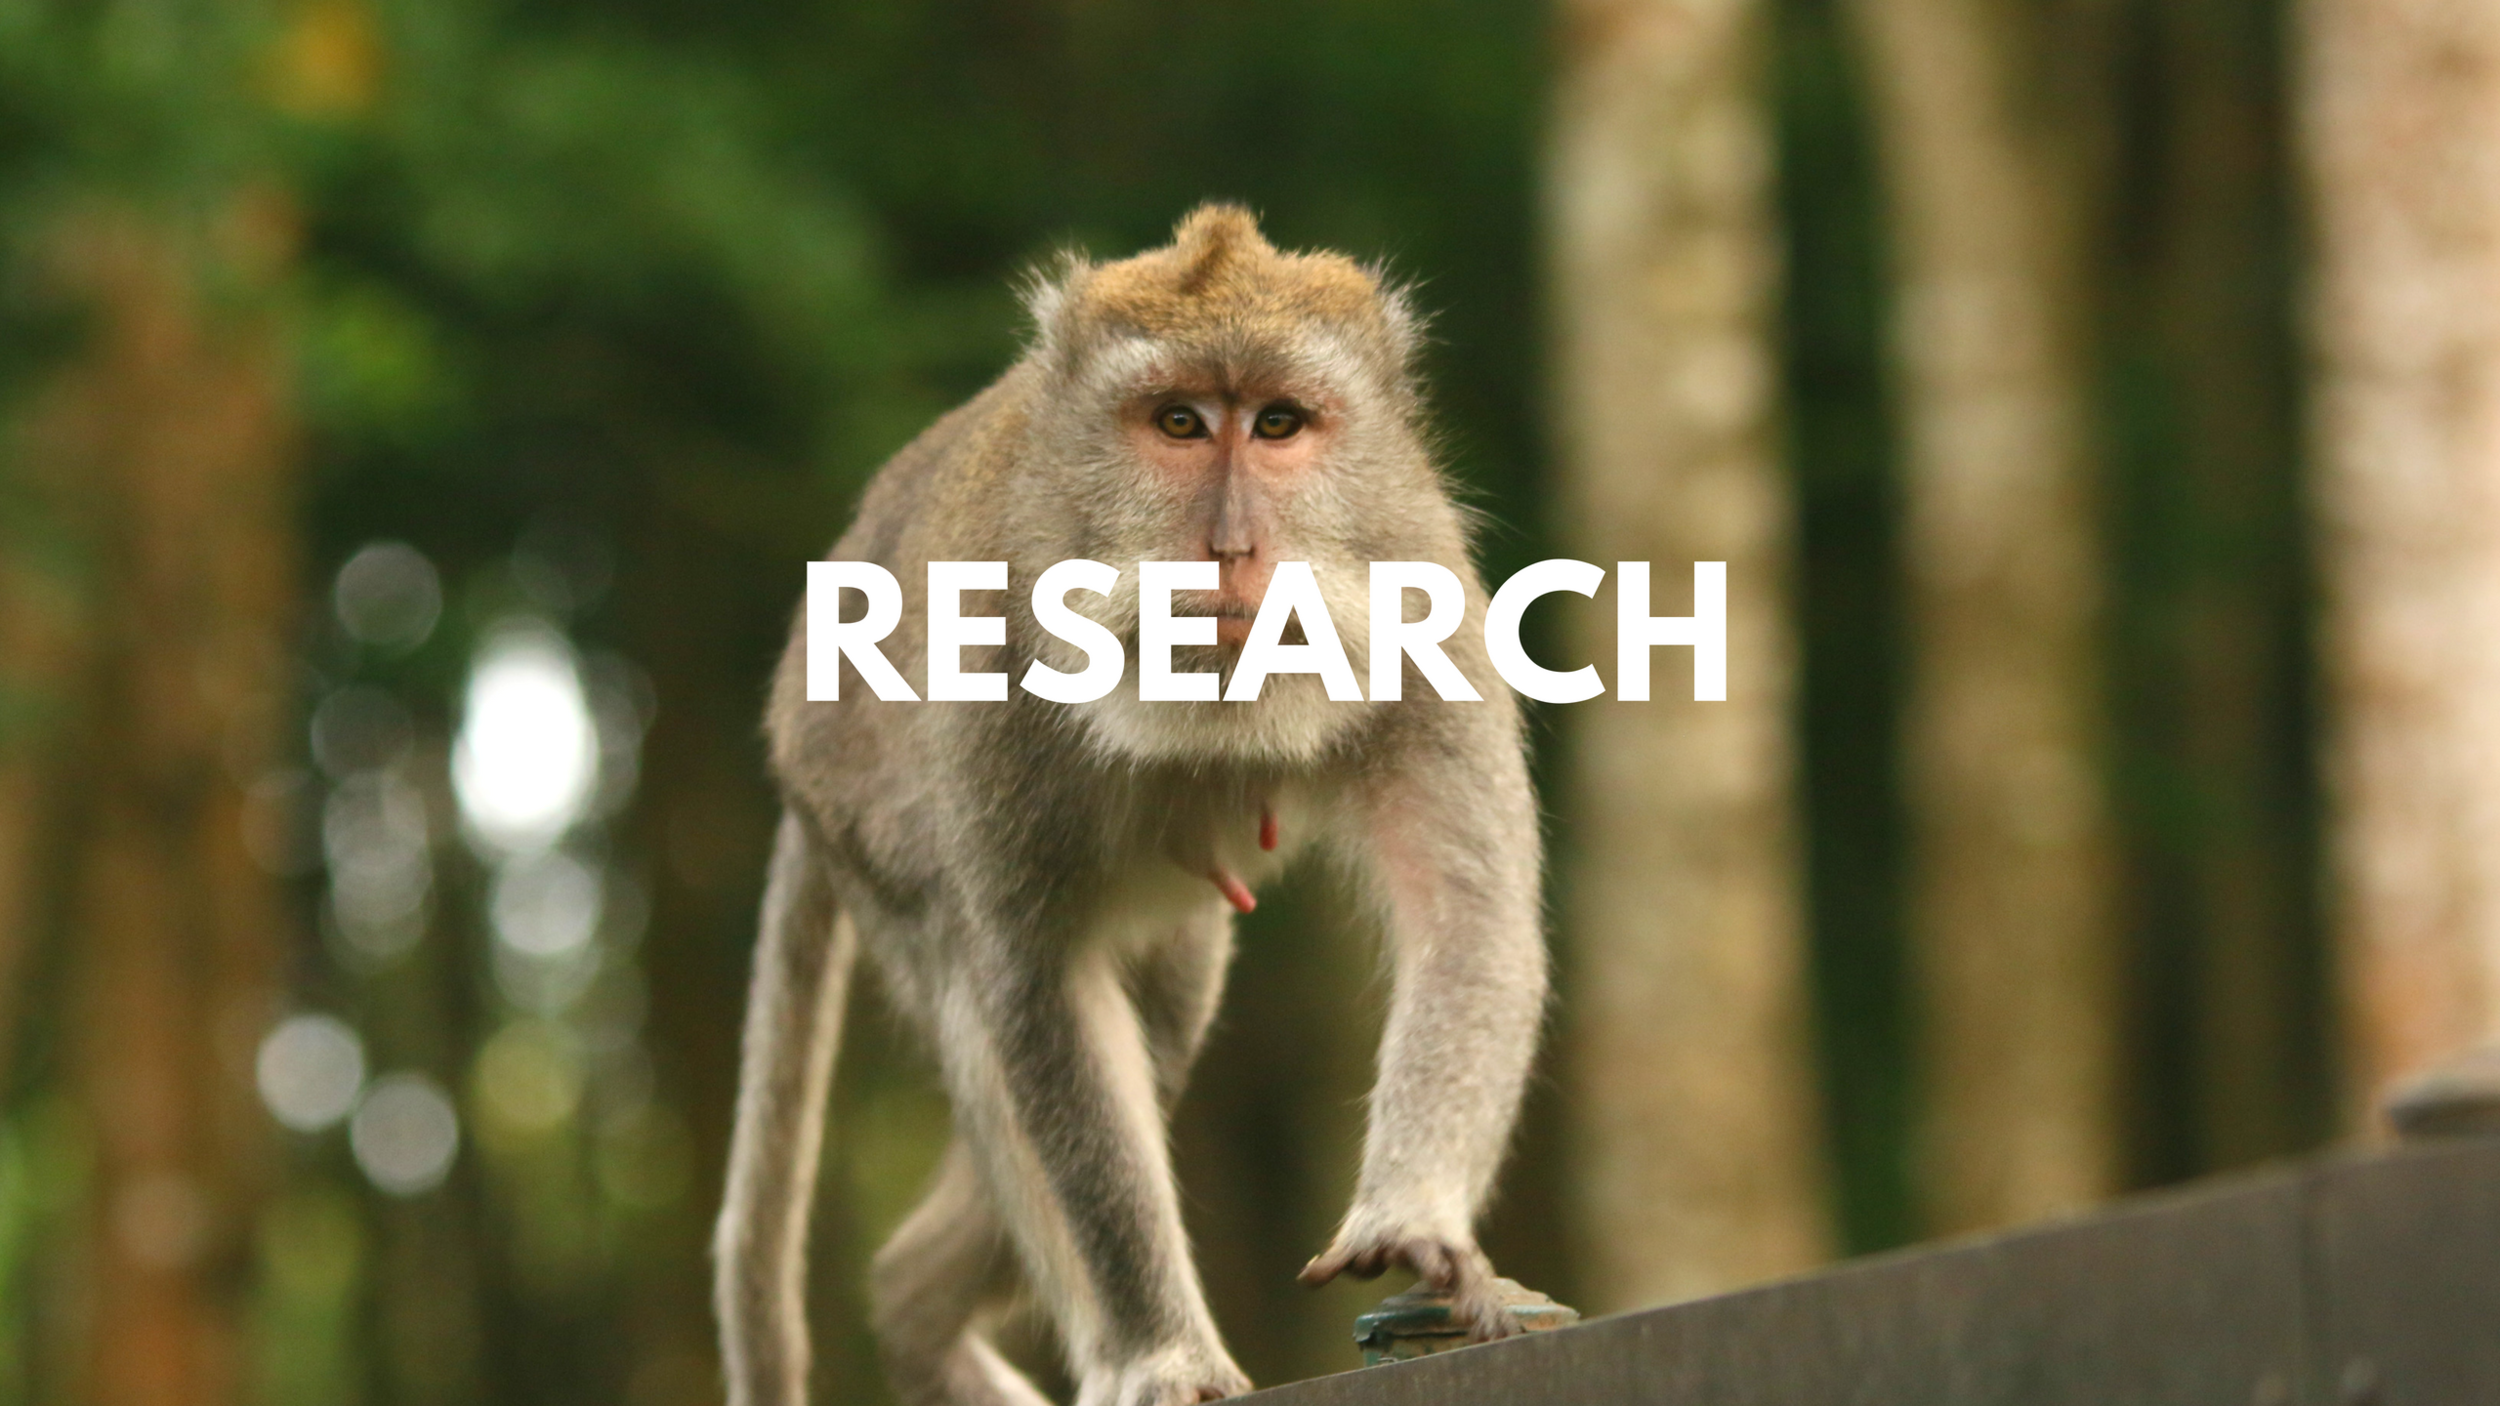 Dissertations and research projects